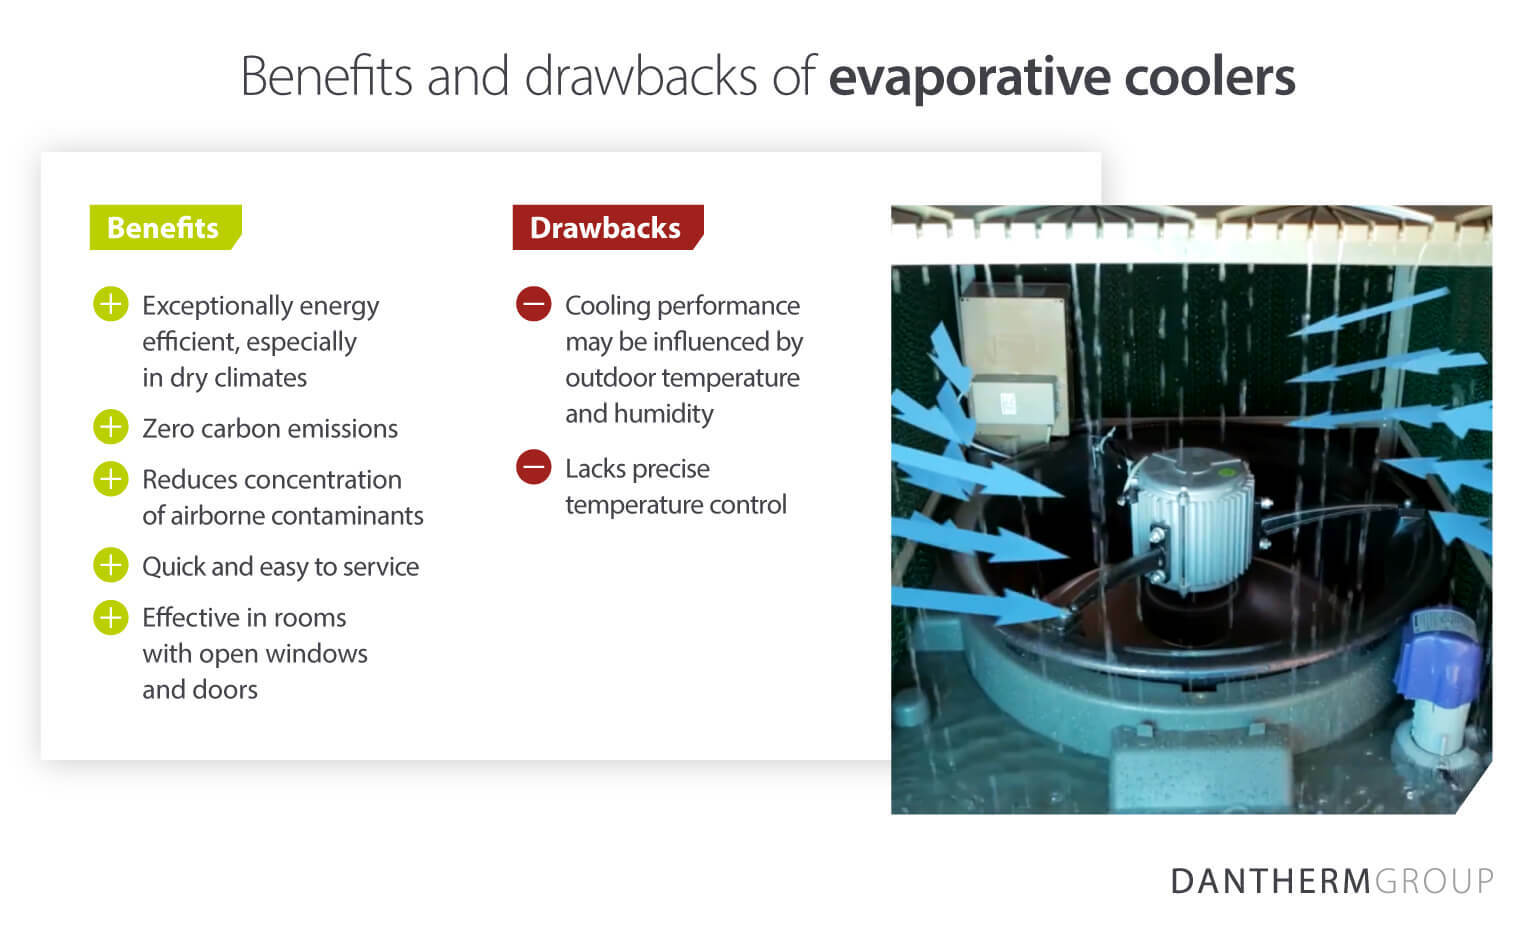 Benefits and drawbacks of evaporative coolers - Pros vs Cons